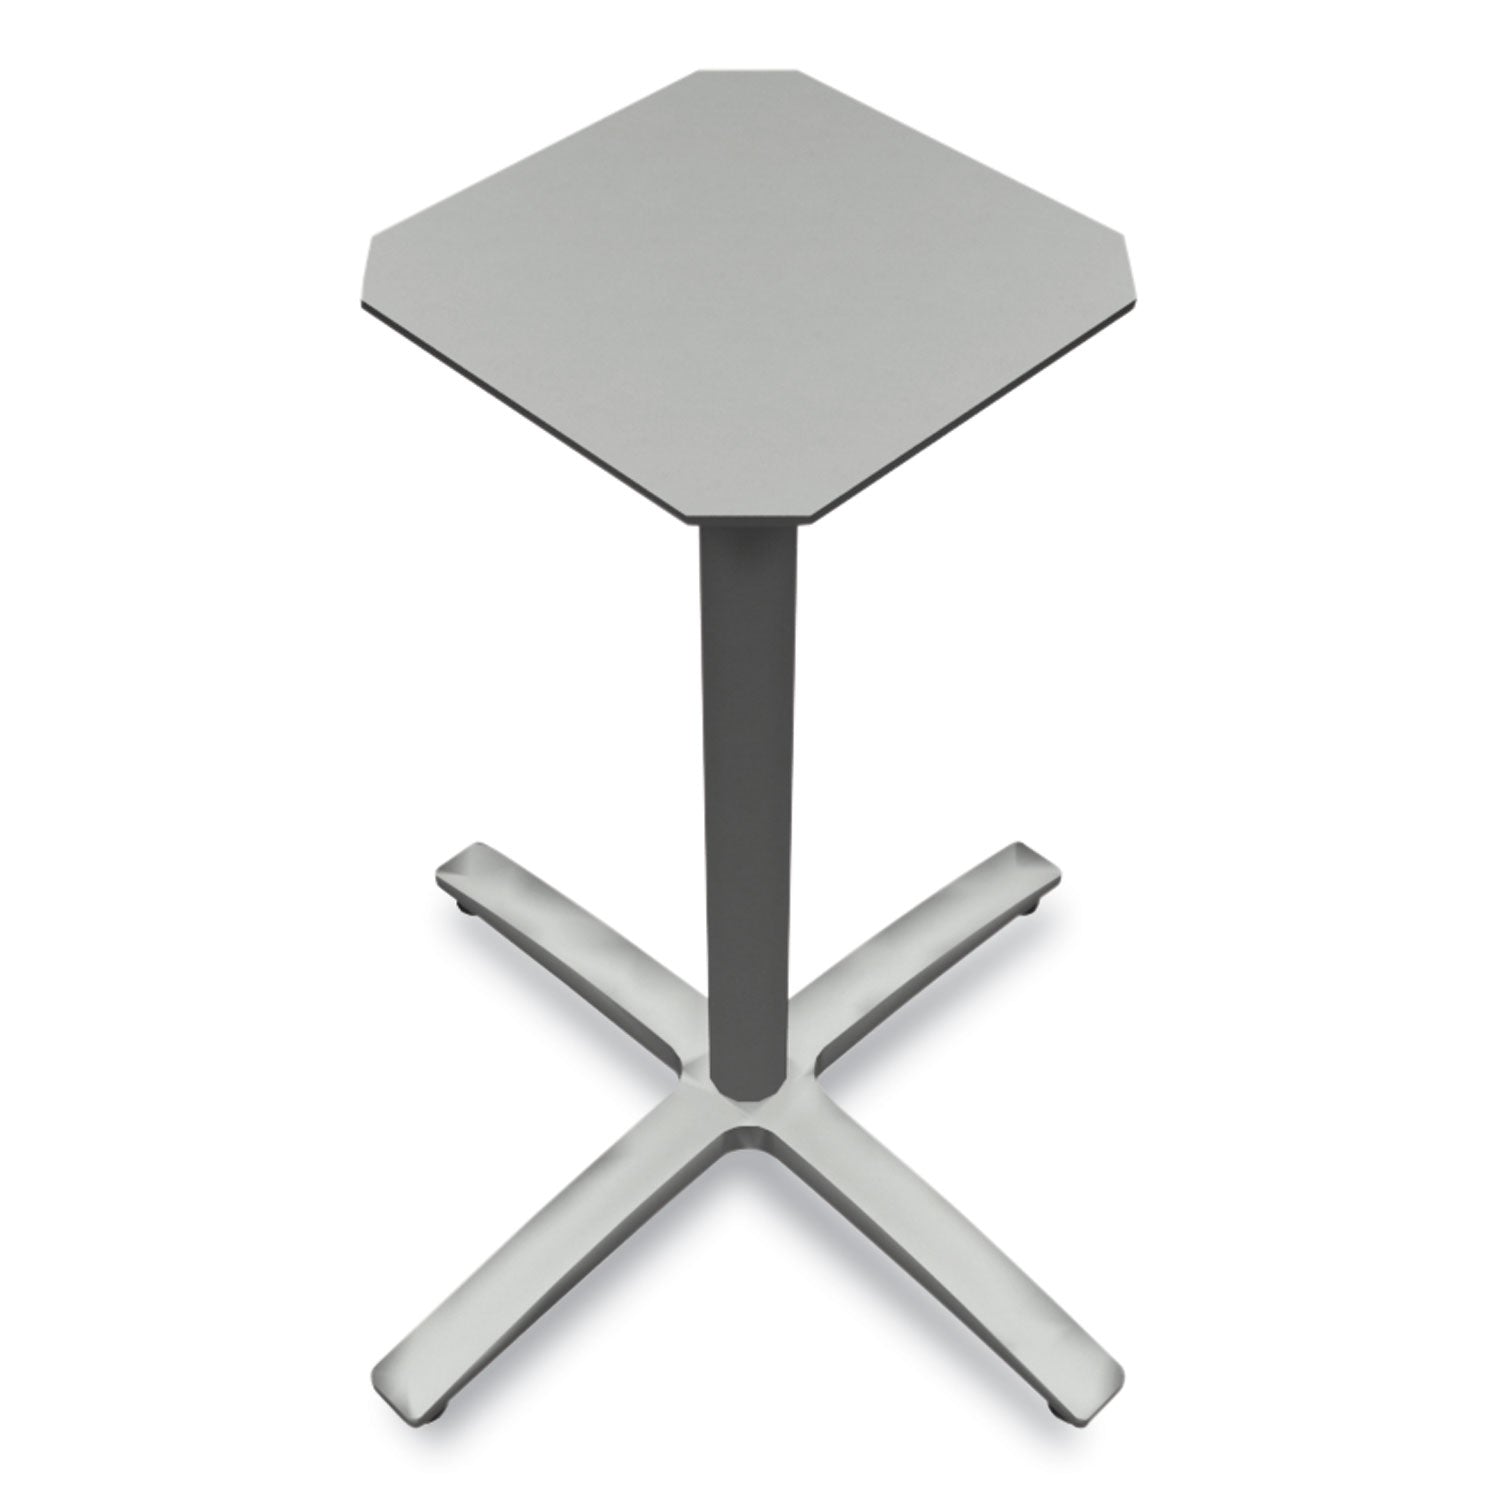 between-seated-height-x-base-for-30-to-36-table-tops-2618w-x-2957h-silver_honbtx30spr8 - 3